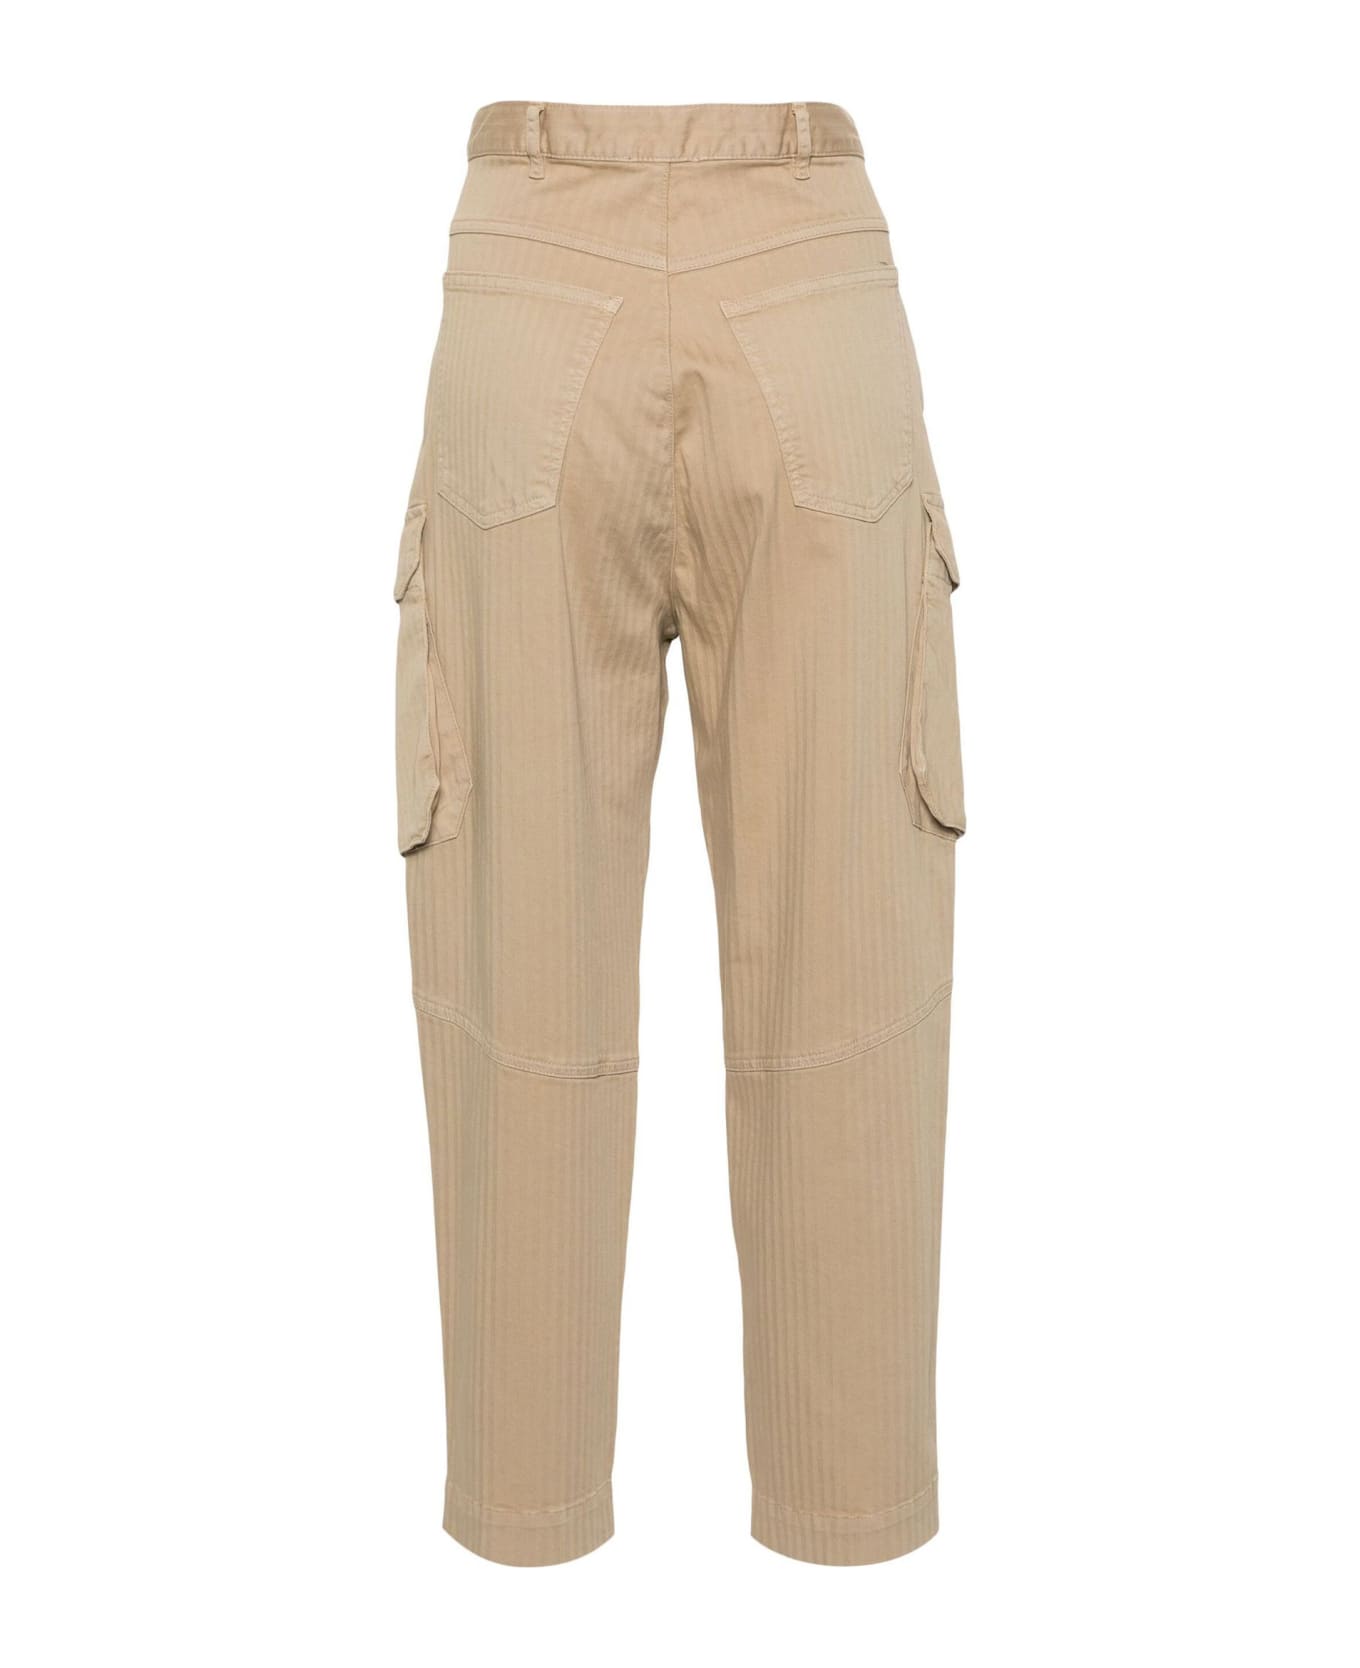 SEMICOUTURE Sand Beige Cotton Blend Trousers - Beige